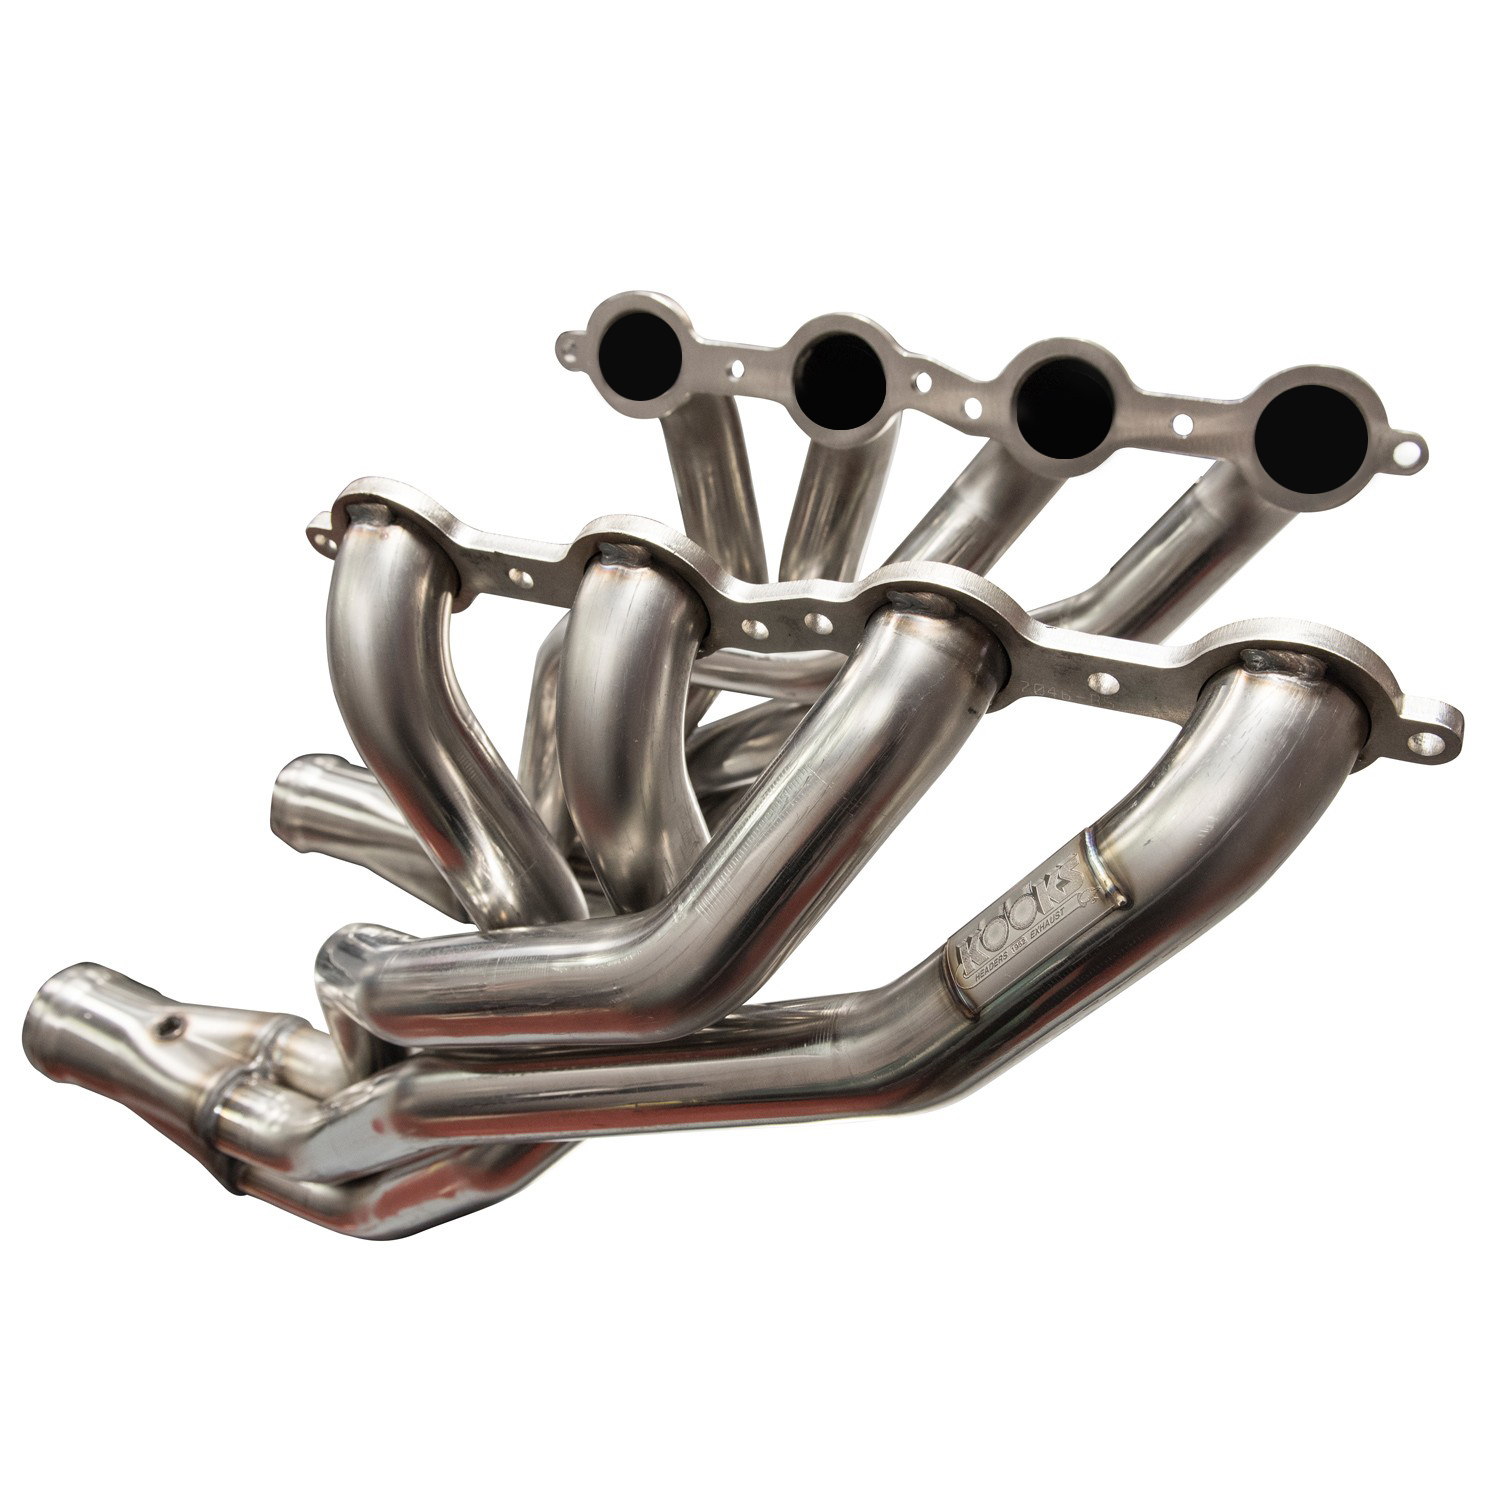 Stainless Steel Headers 1.875 x 3" Long Tube w/Torca Tight Connections Incl. O2 Extensions/Gaskets/Hardware